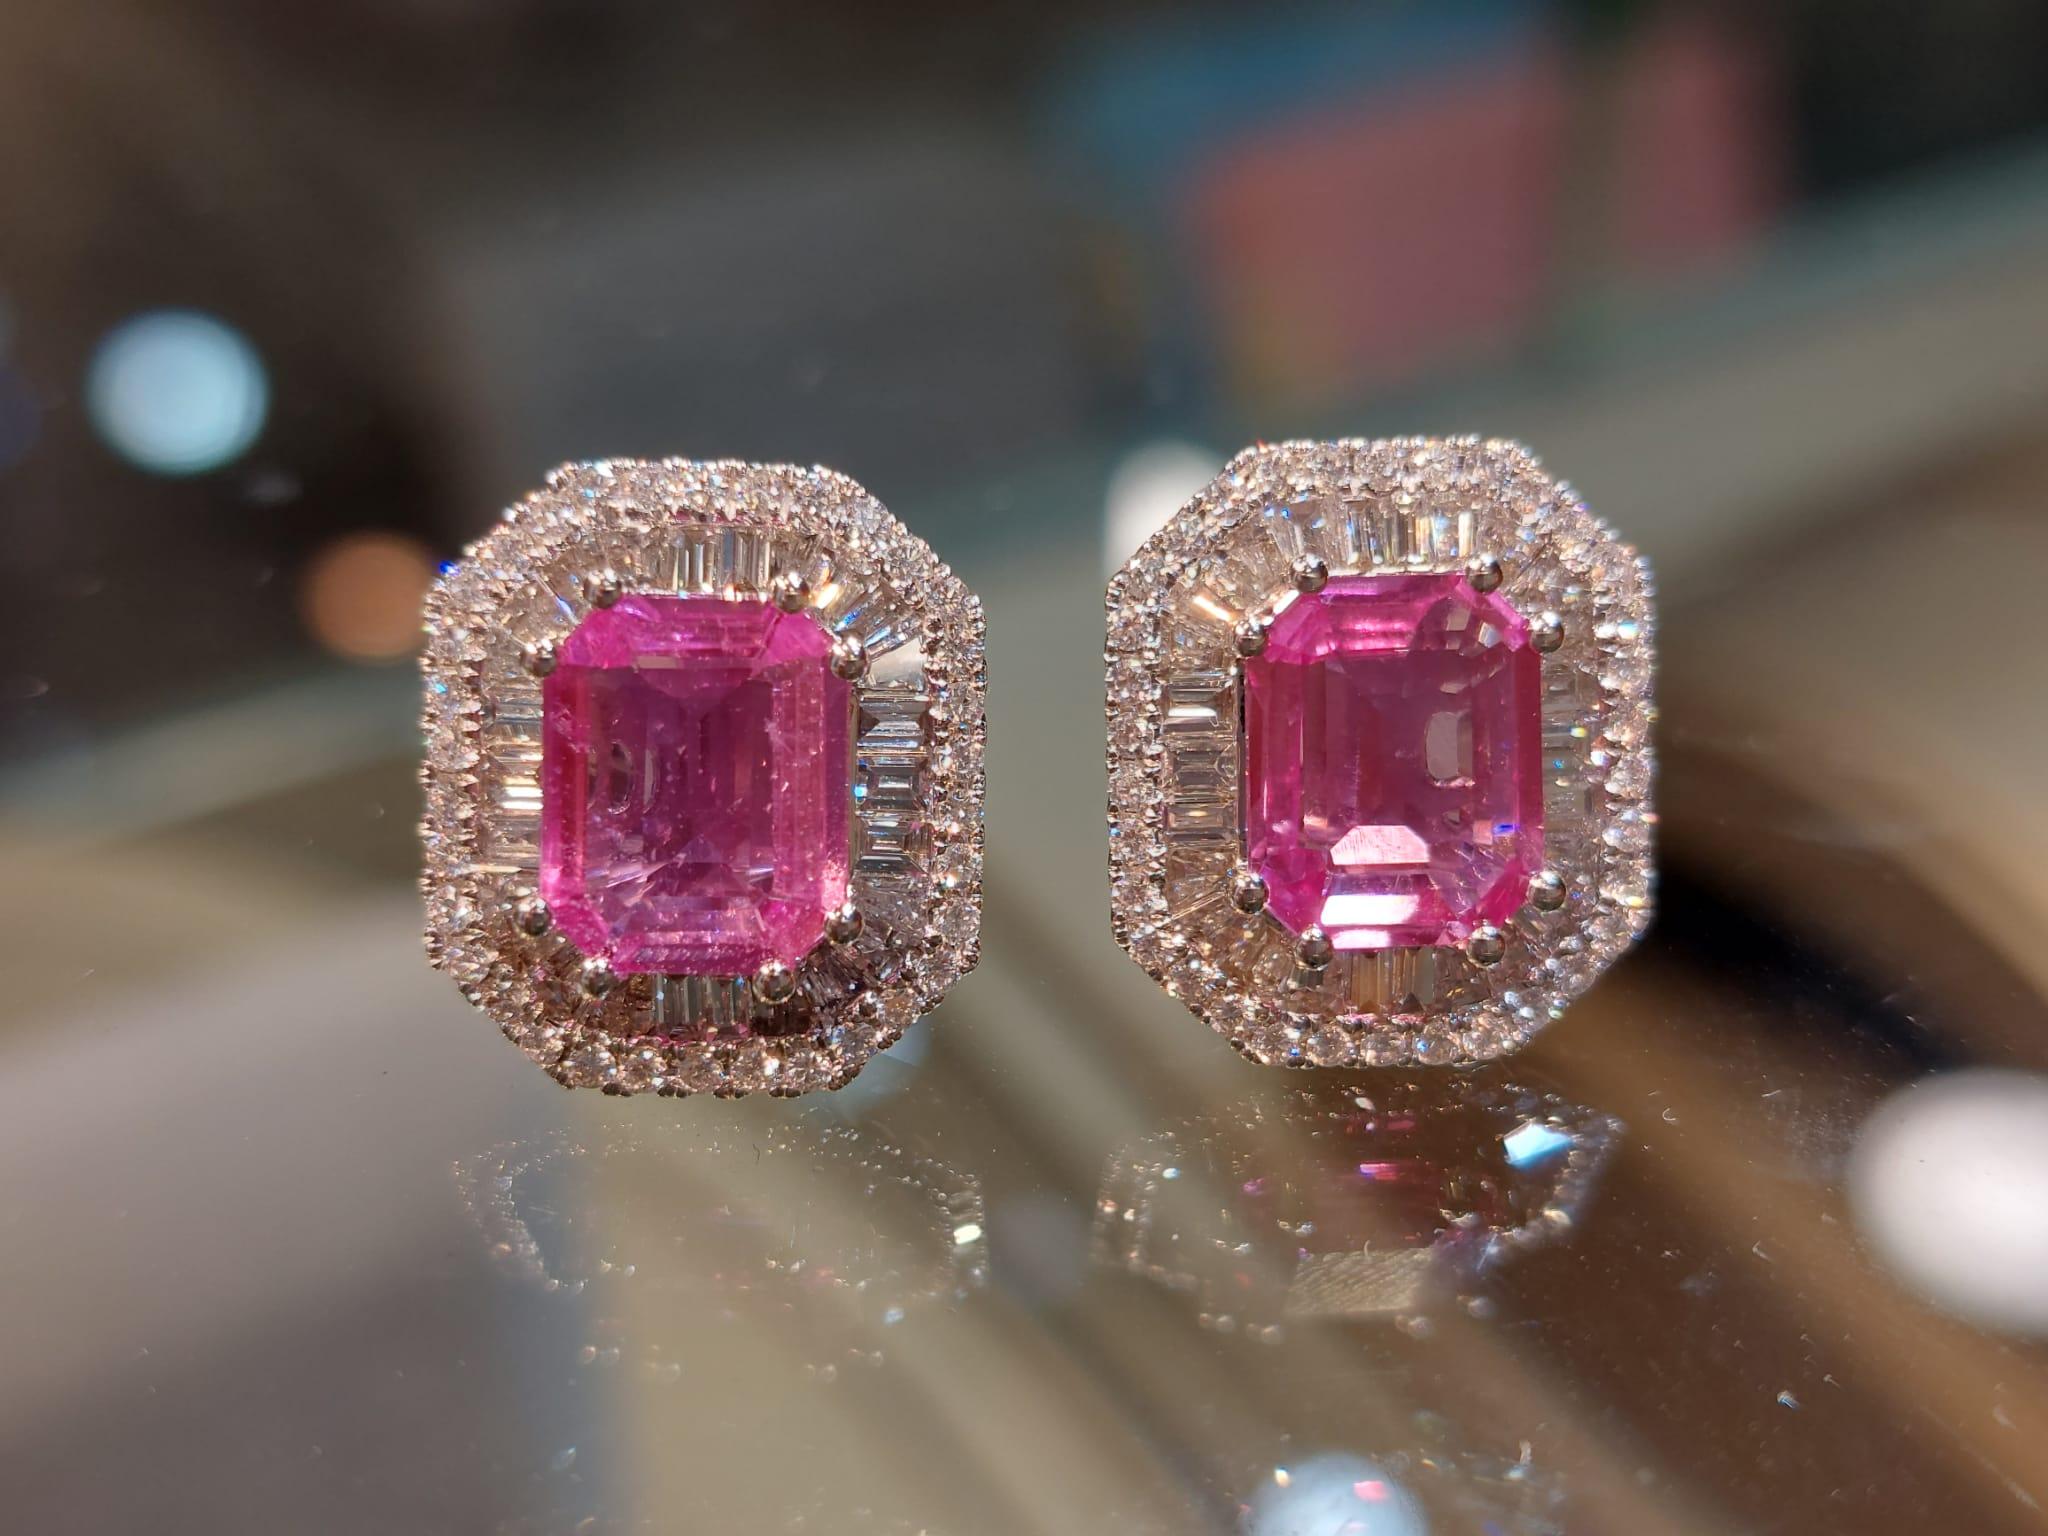 GILIN 18K White Gold Diamond Earring with Pink Sapphire For Sale 5